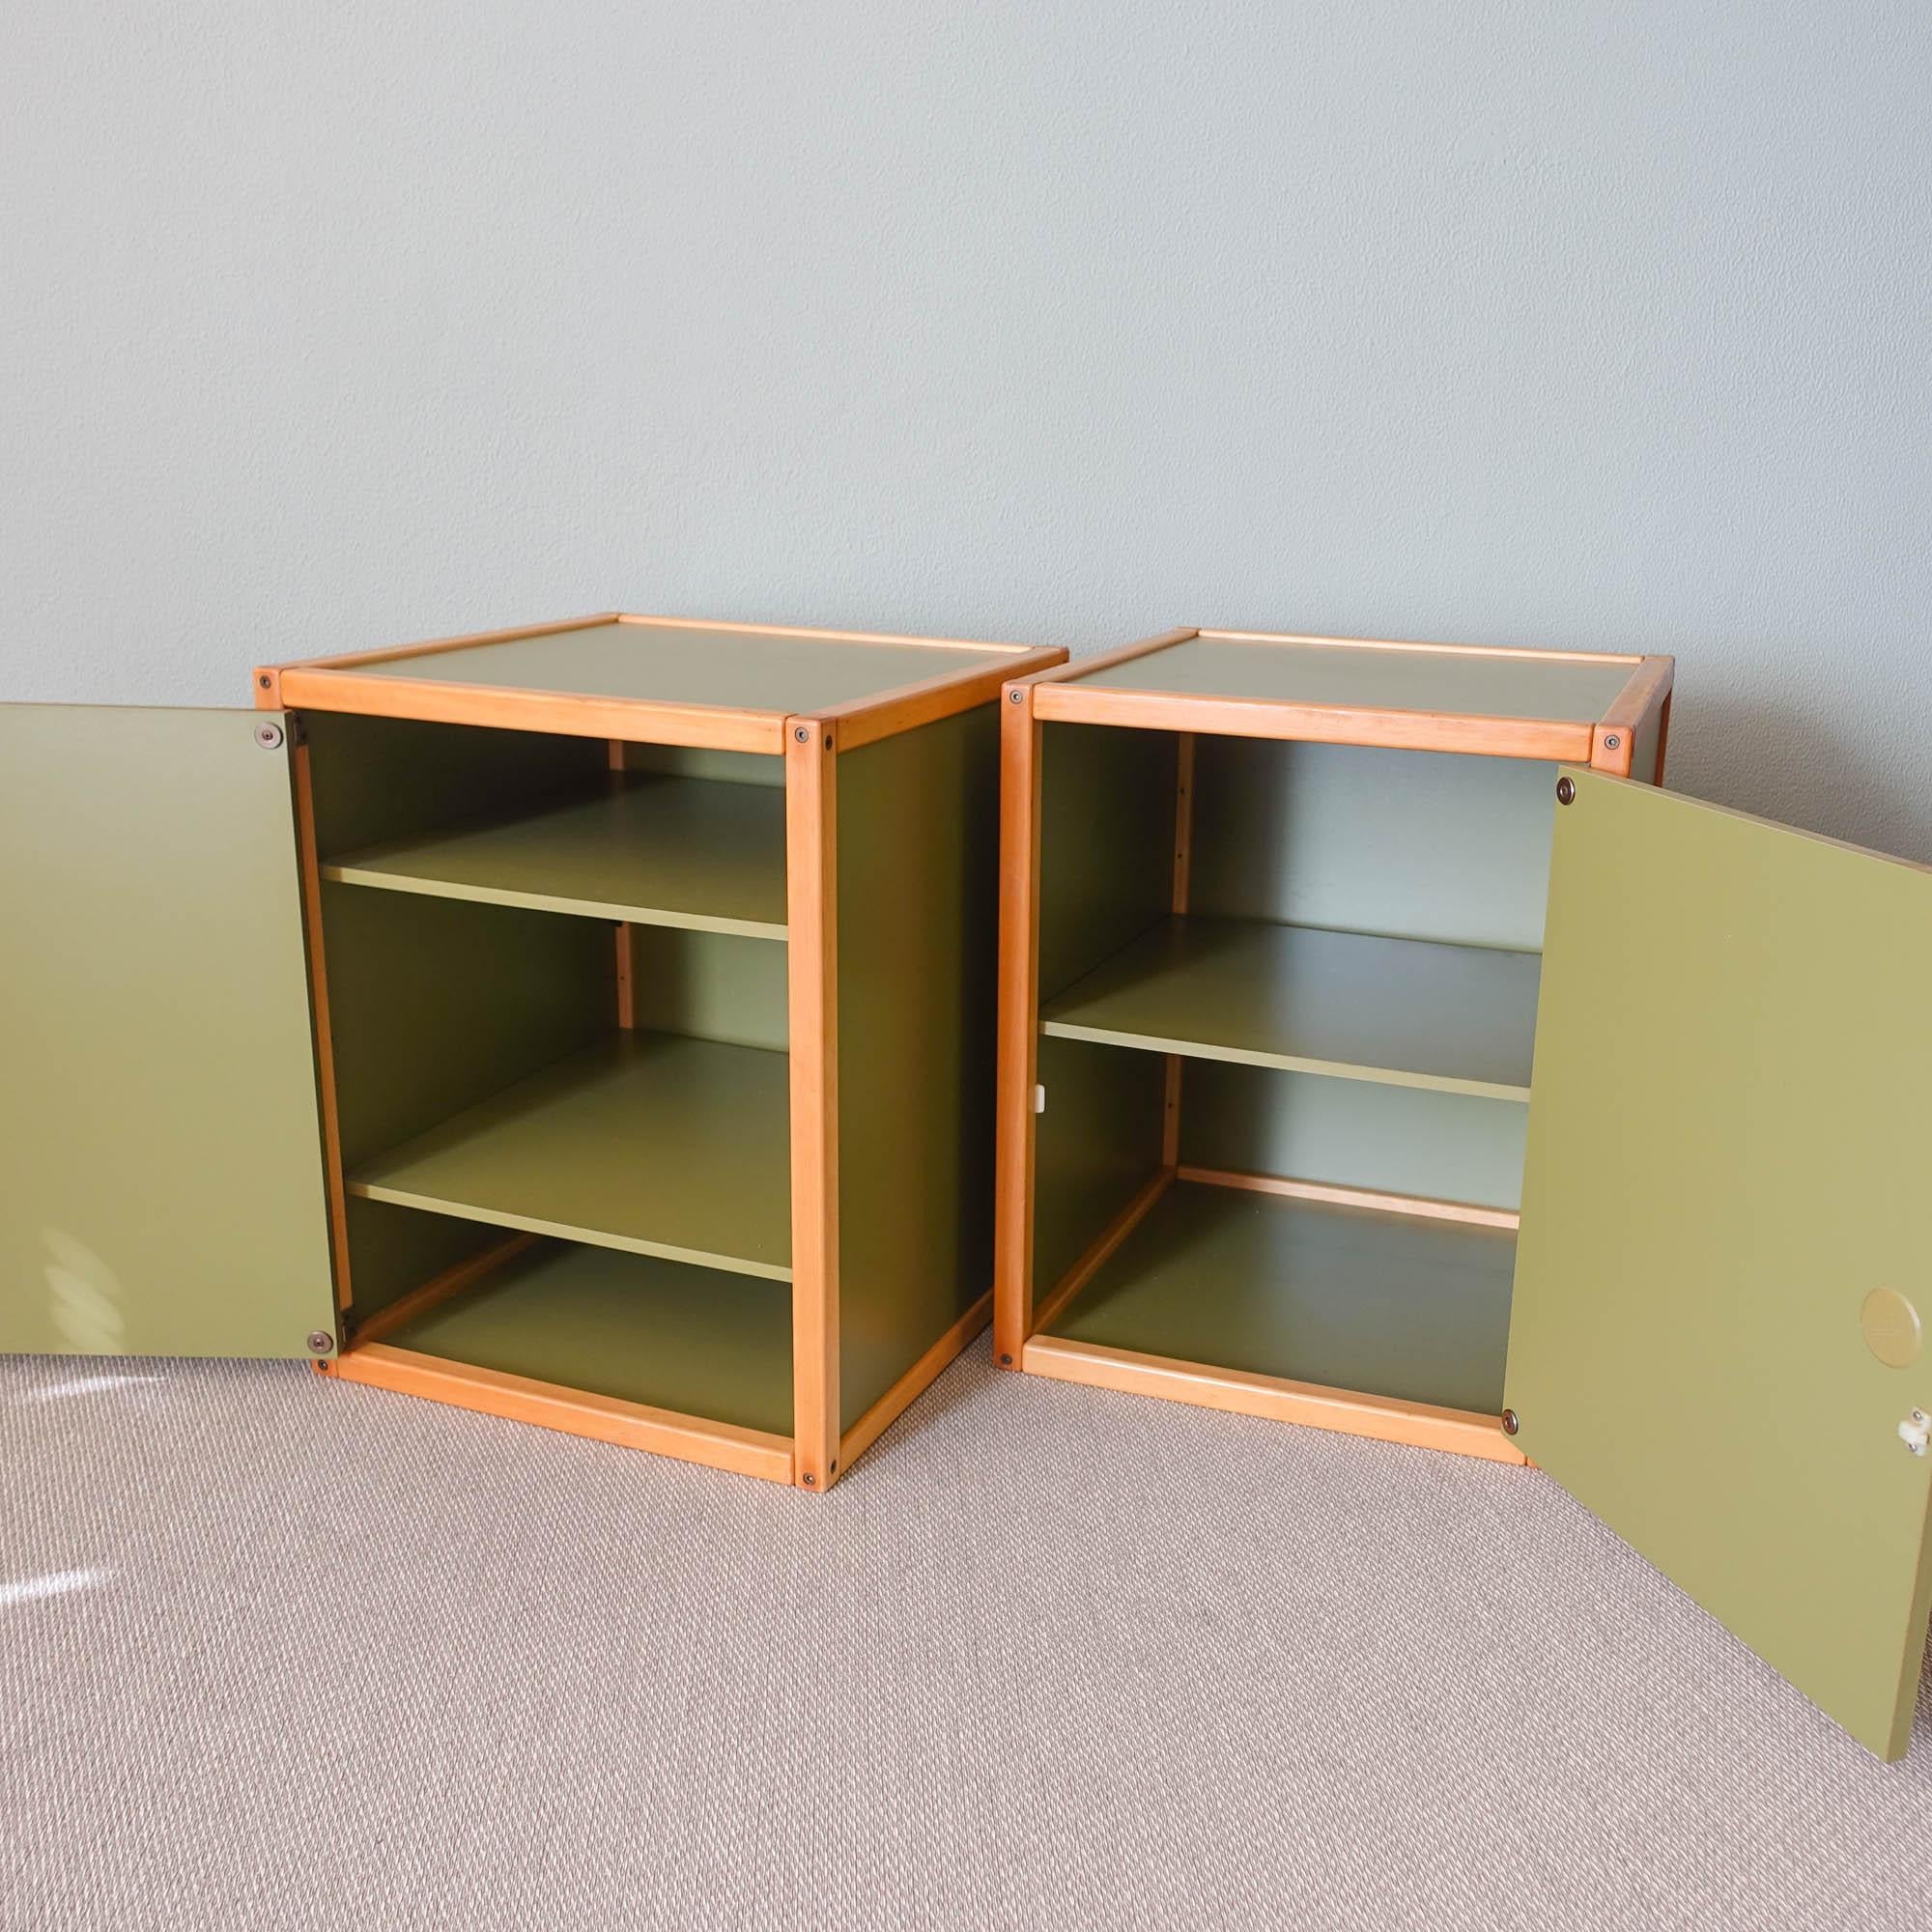 Pair of Vintage Profilsystem Collection Storage Units by Elmar Flötotto For Sale 2